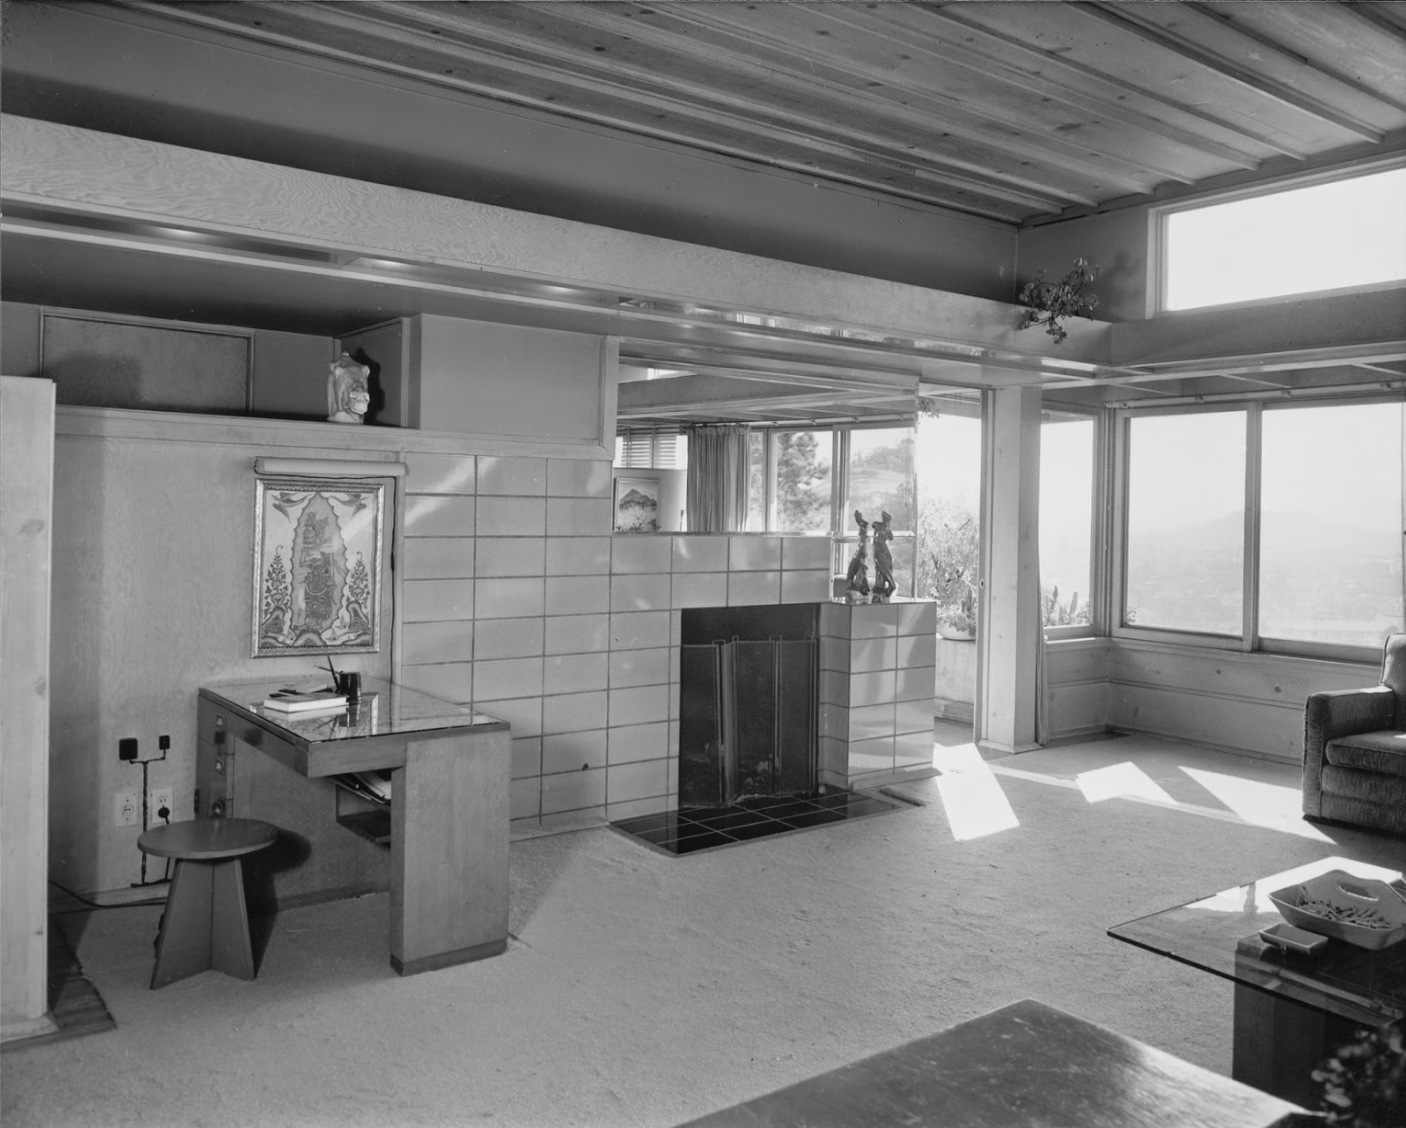 Living room inside one of the Manola Court apartments, photographed by Julius Shulman in 1938.